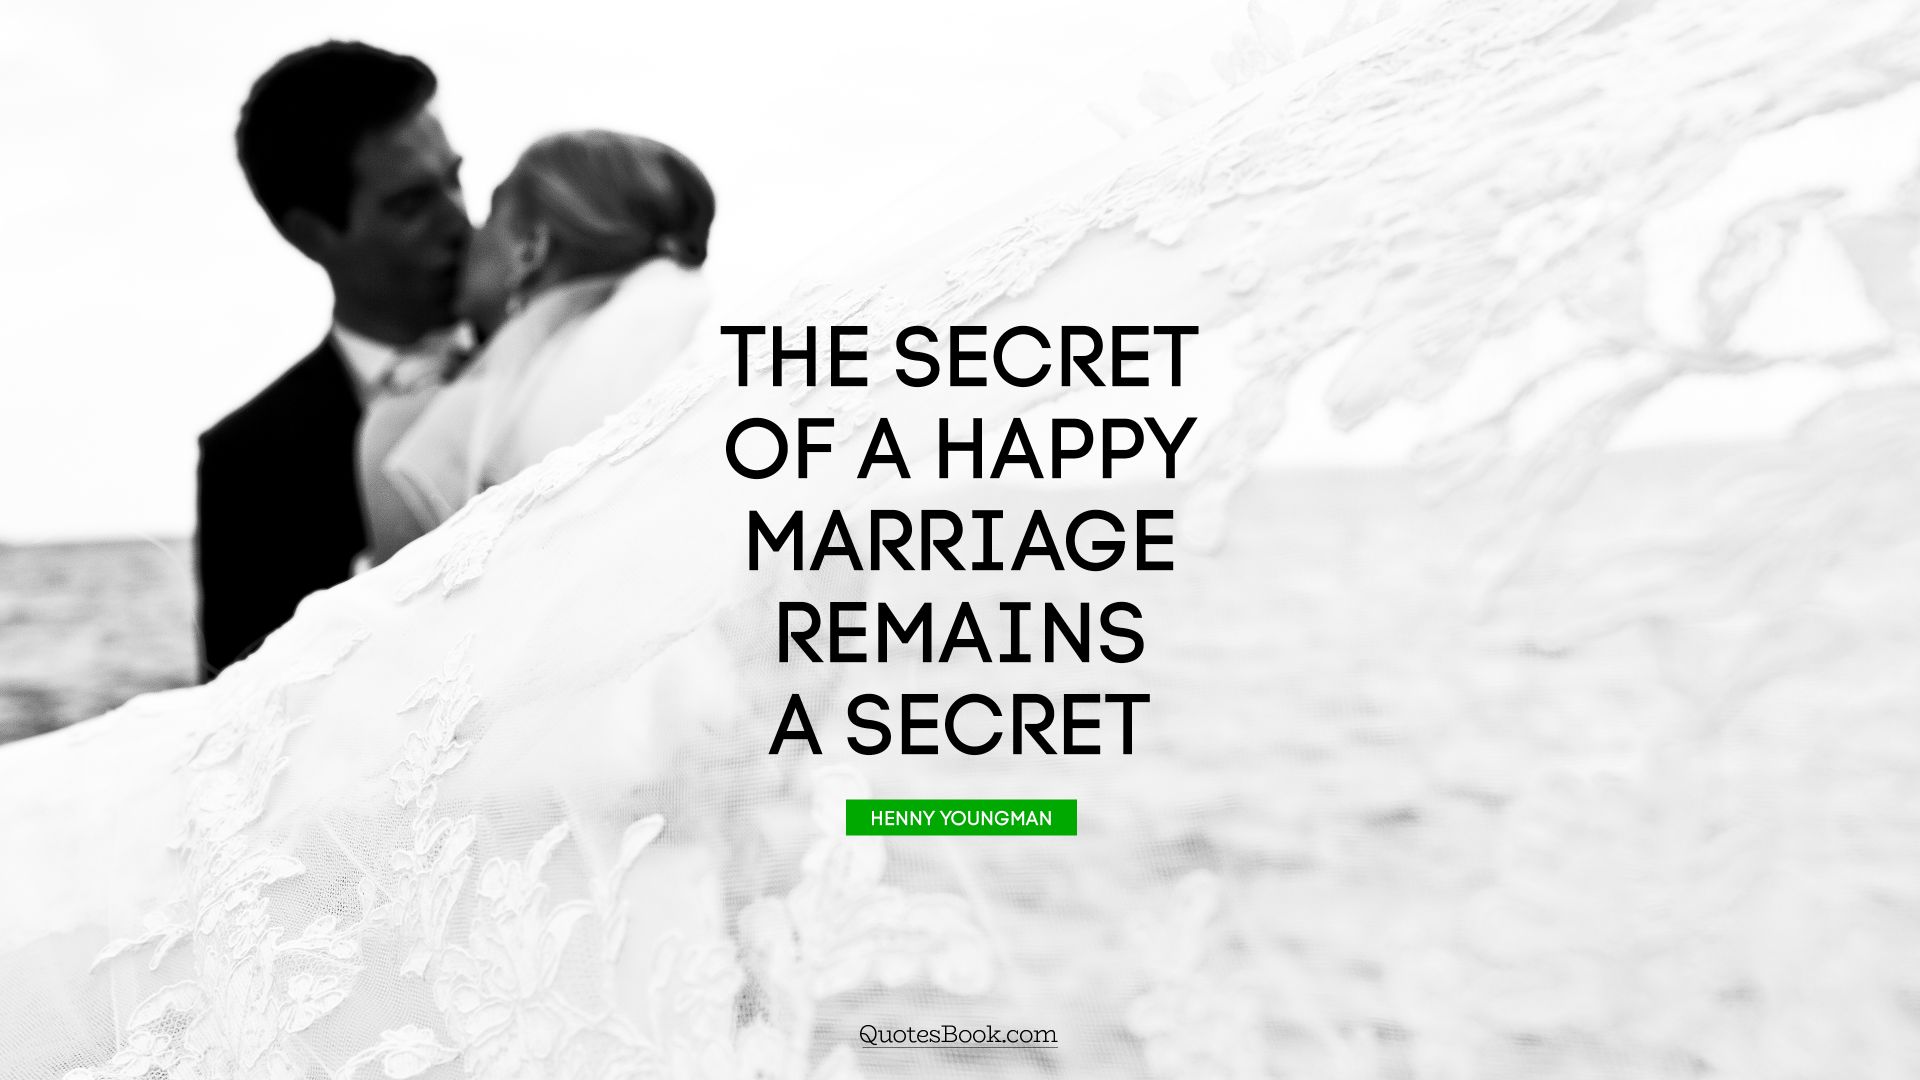 The secret of a happy marriage remains a secret. - Quote by Henny Youngman  - Page 4 - QuotesBook